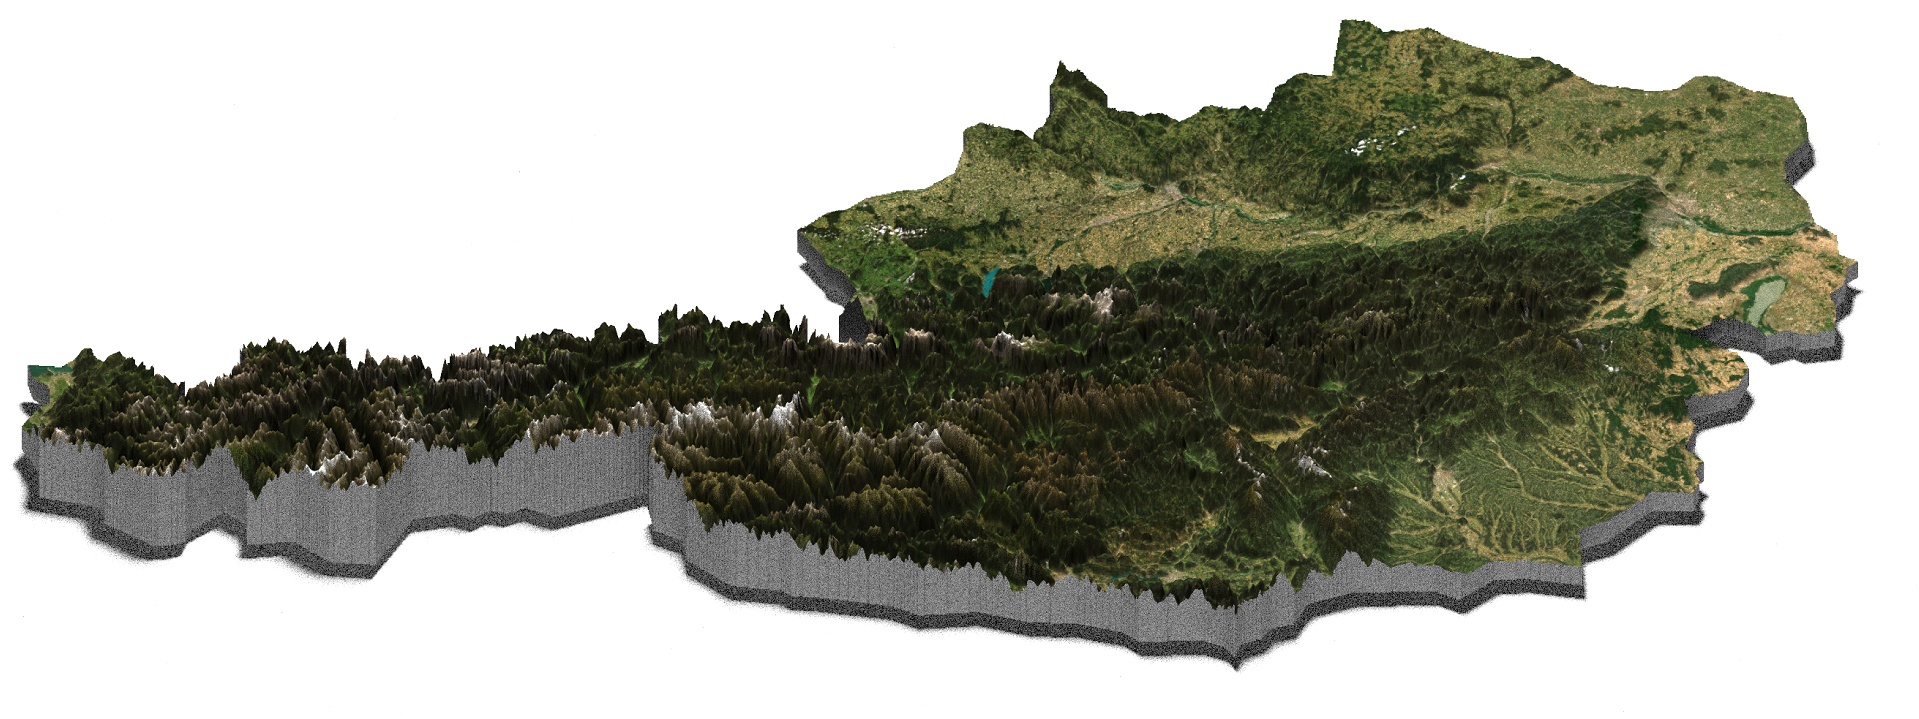 Making Realistic 3d Topographic Maps In R Milos Popovic Personal